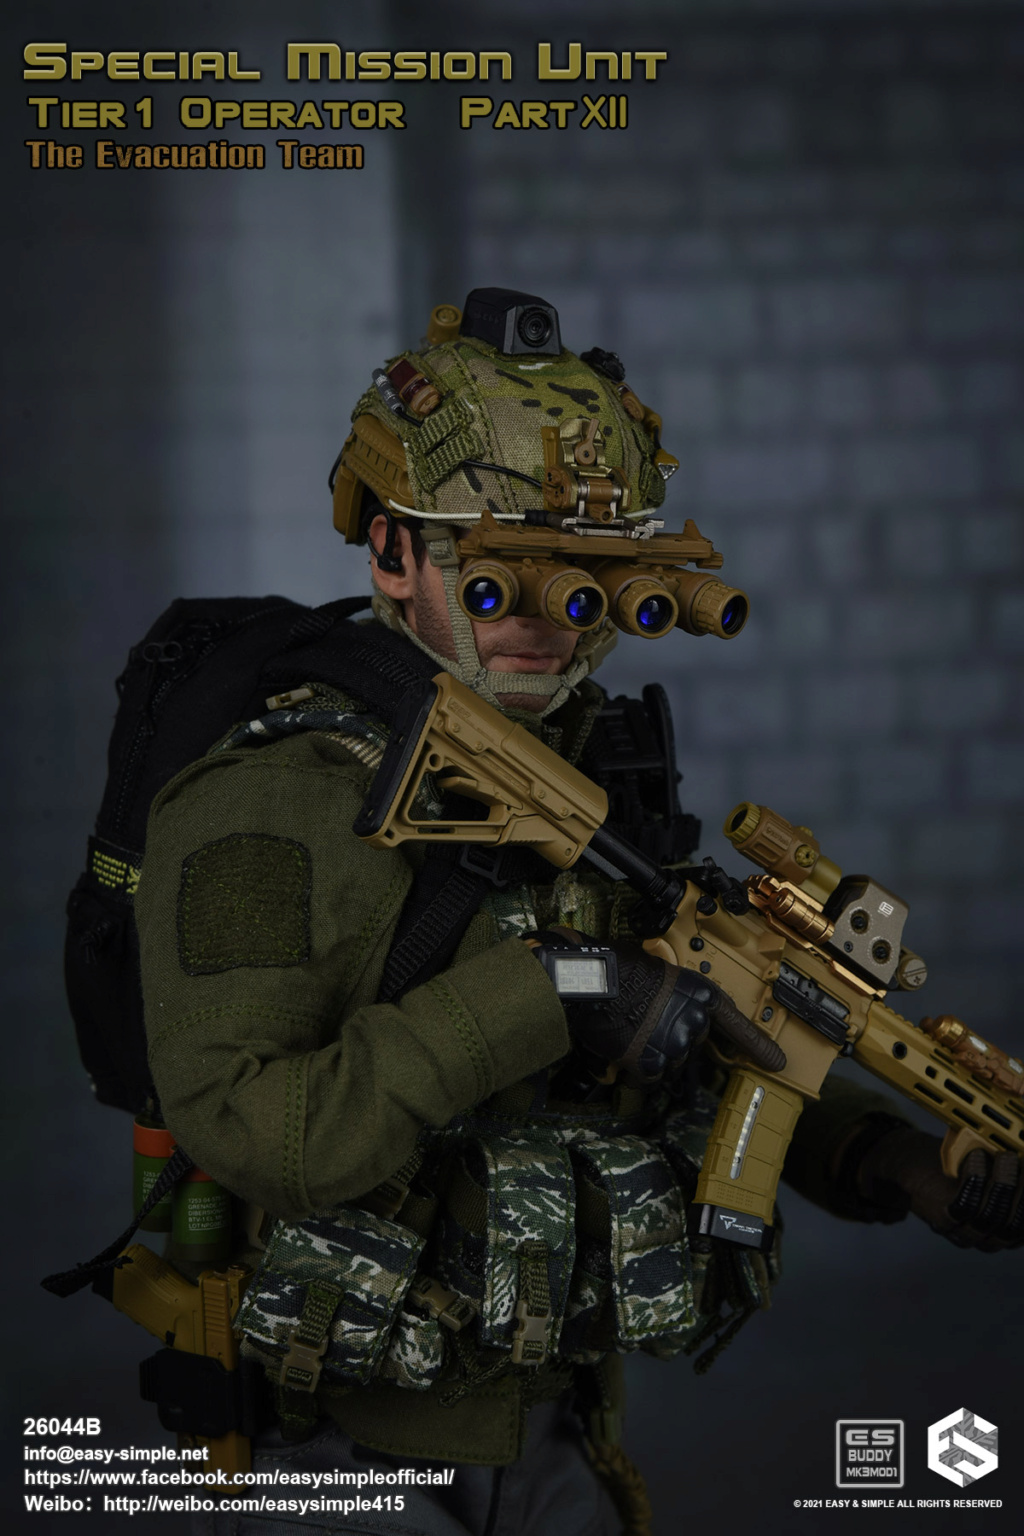 Tier1Operator - NEW PRODUCT: Easy&Simple: 26044B Special Mission Unit Tier1 Operator Part XII The Evacuation Team Cd4bc210